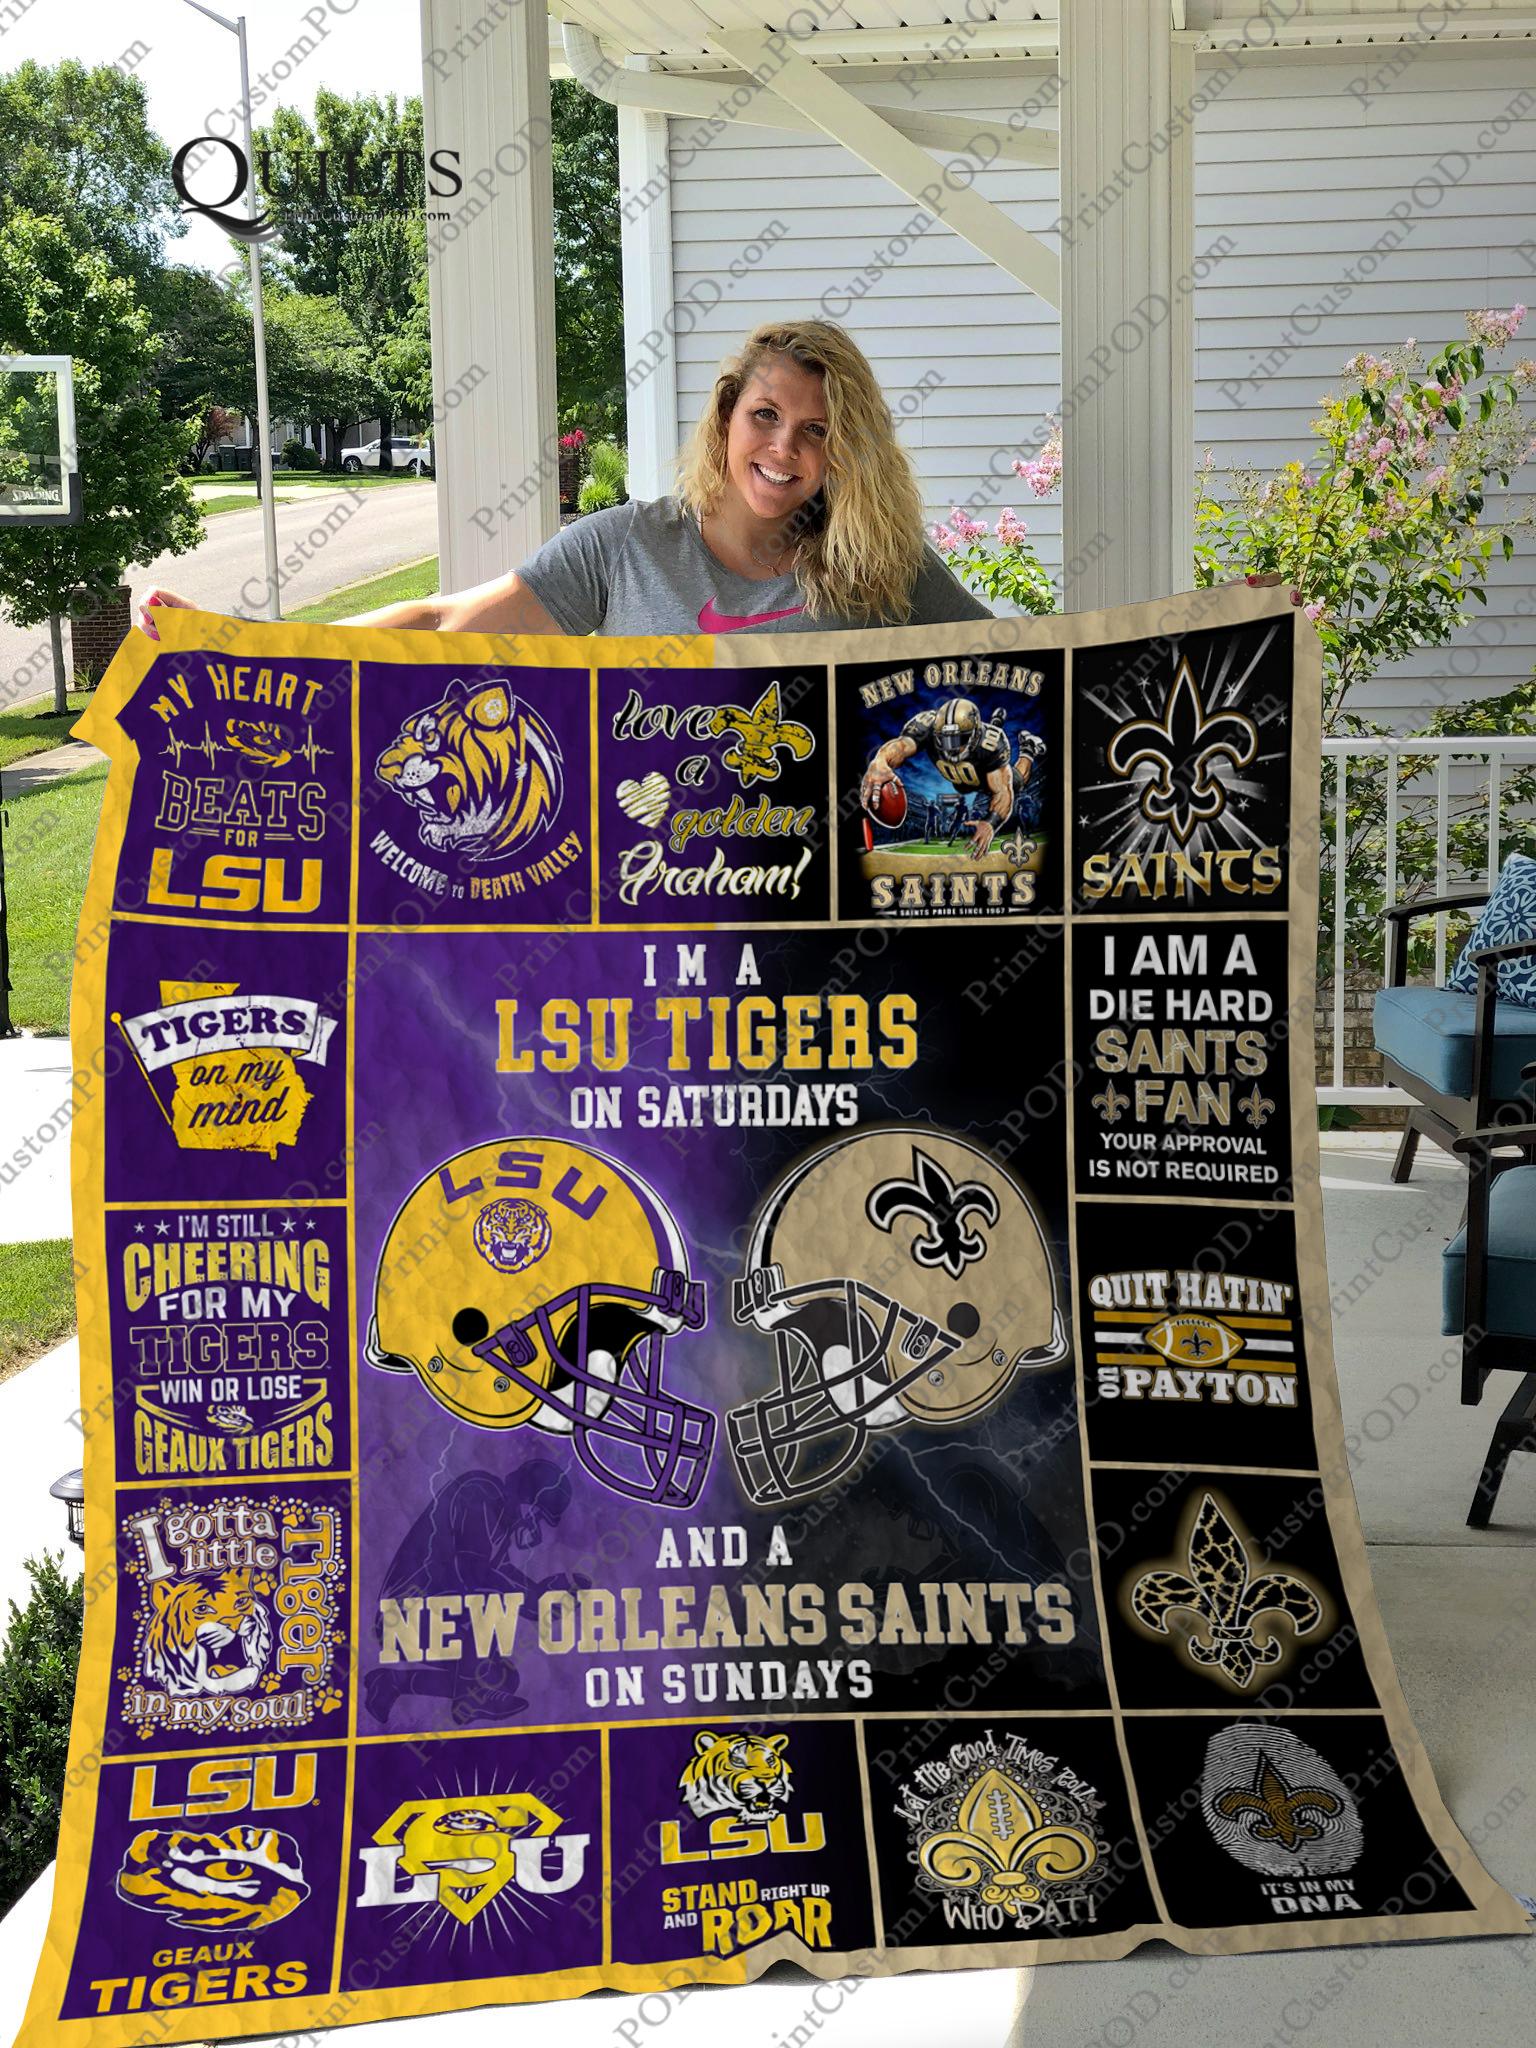 I’m a lsu tigers on saturdays and a new orleans saints on sundays blanket - 2